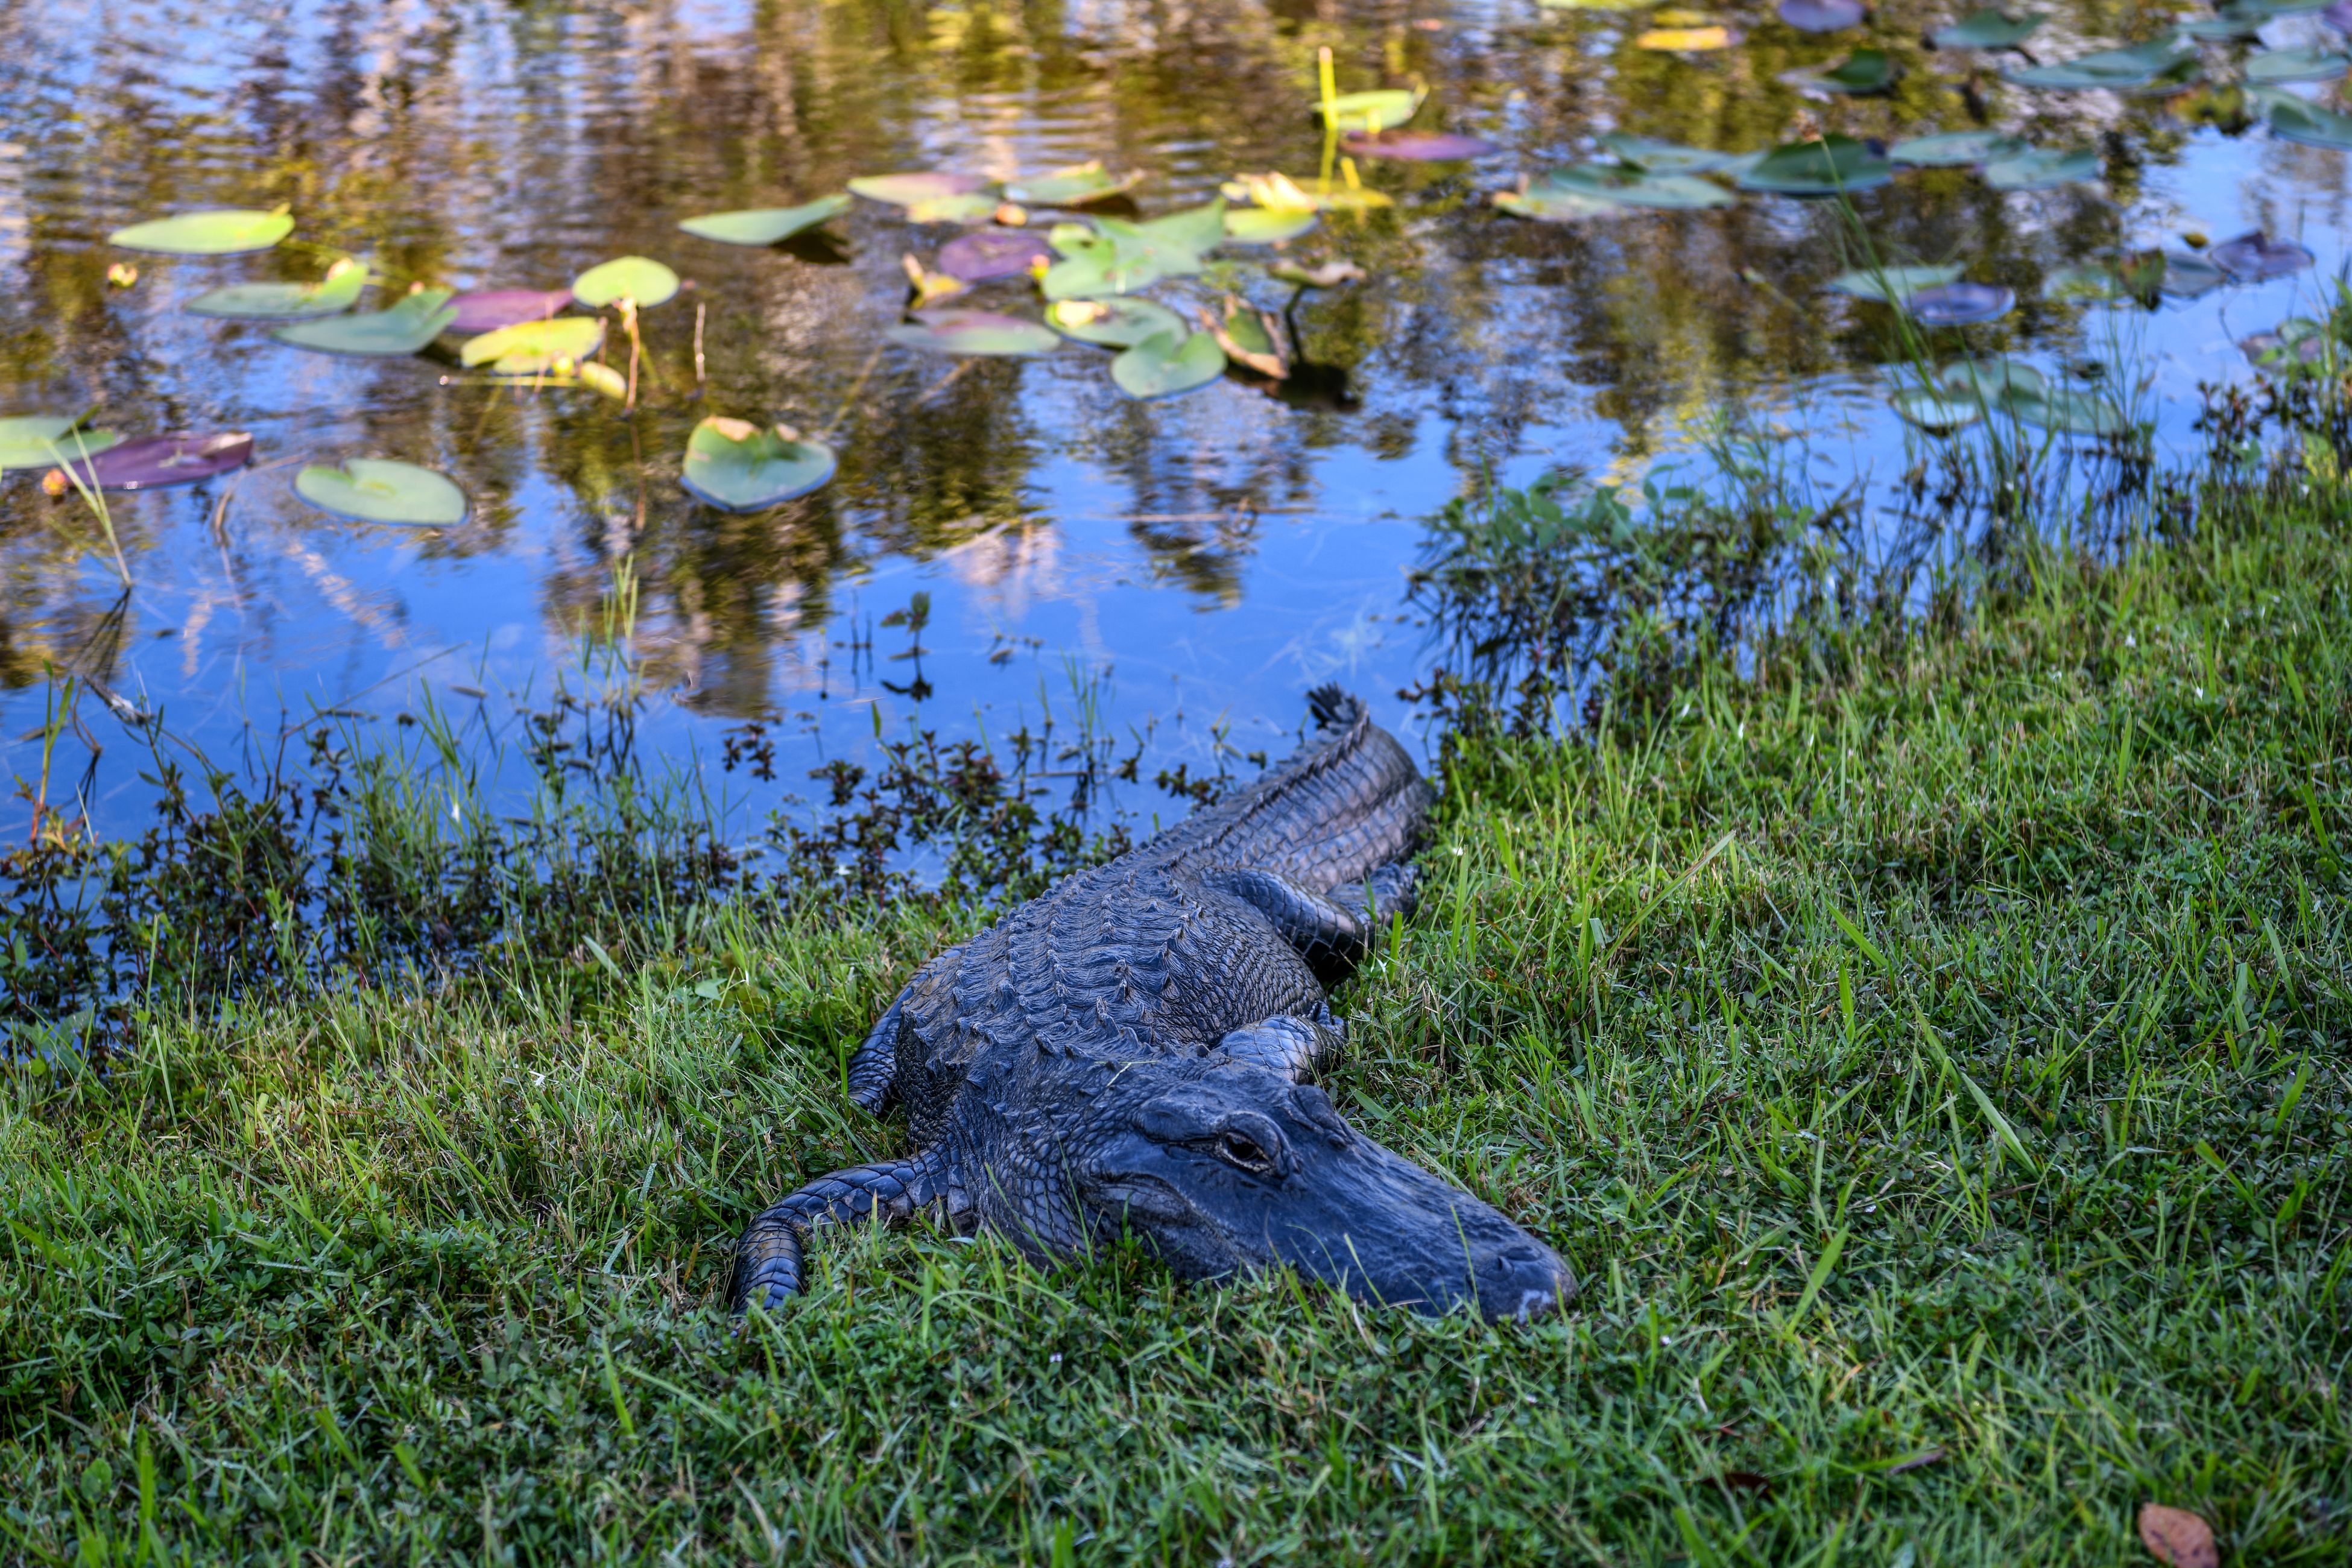 Alligator Attack Leaves Man Dead as Reptile Drags Victim Into Pond